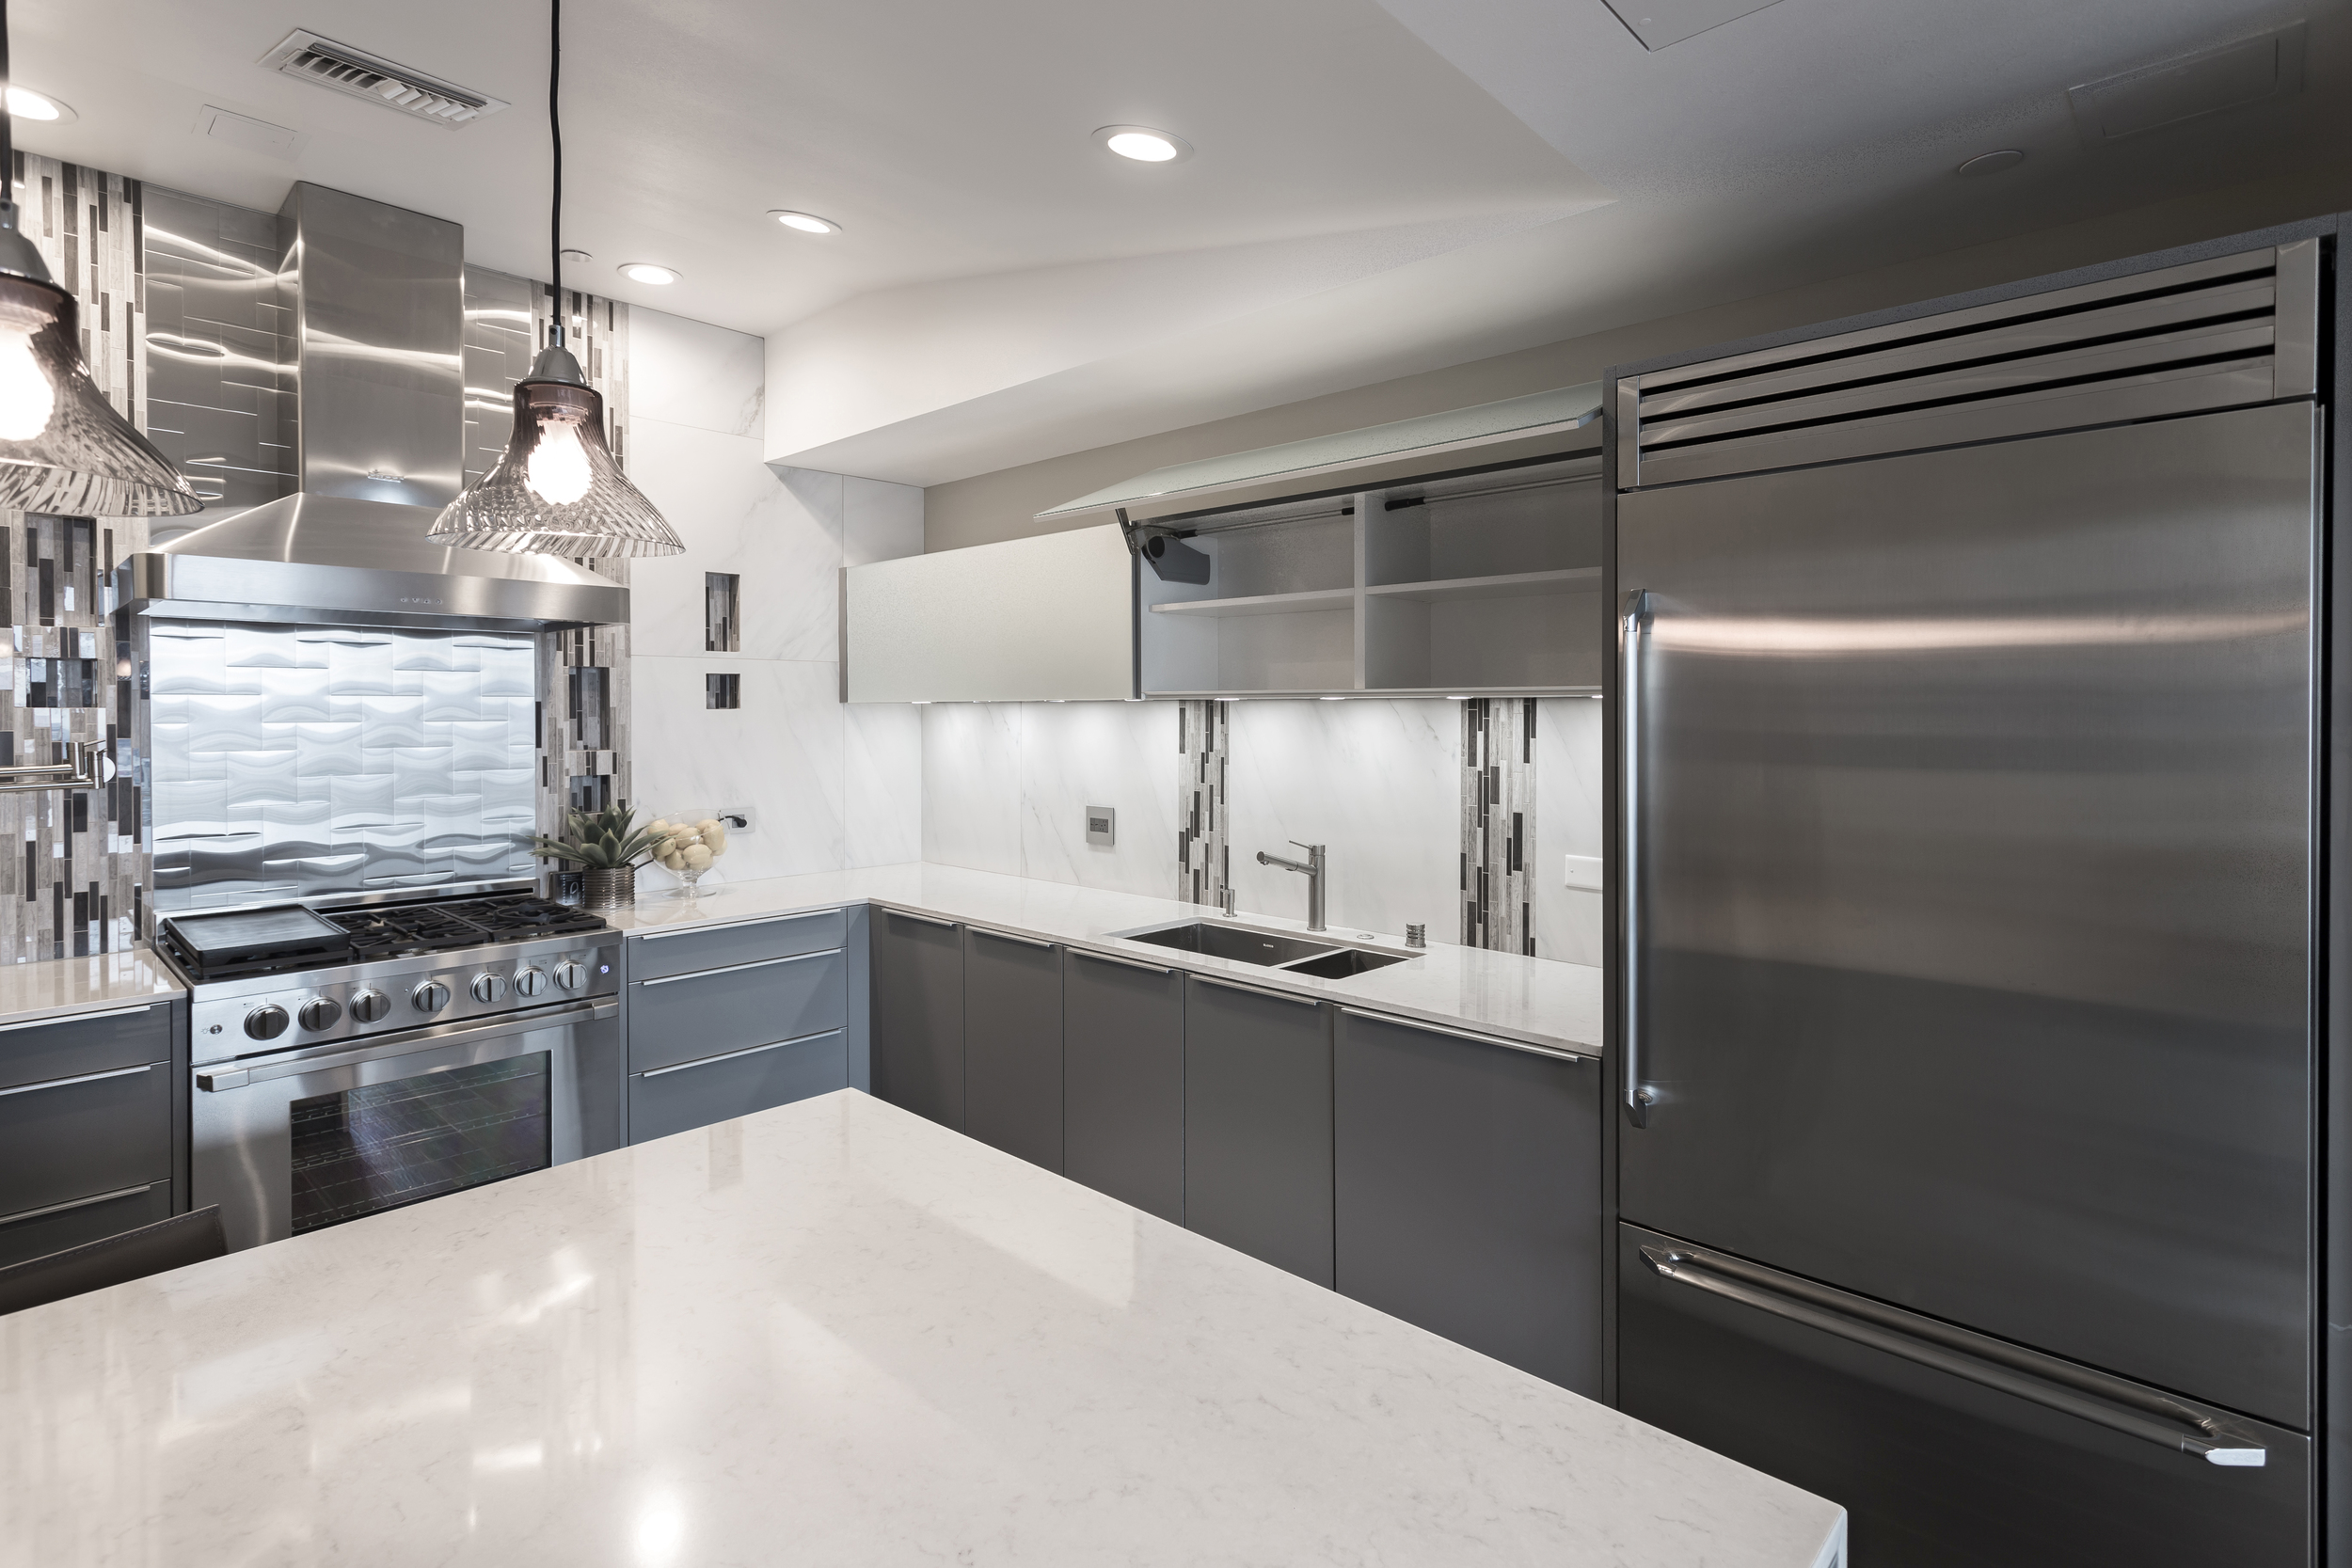 Best of #KBIS2015: Must-Have: The Detailed Perfection Of A Poggenpohl Kitchen | Carla Aston reporting from Modenus' #BlogTourVegas | Image via: Poggenpohl.com